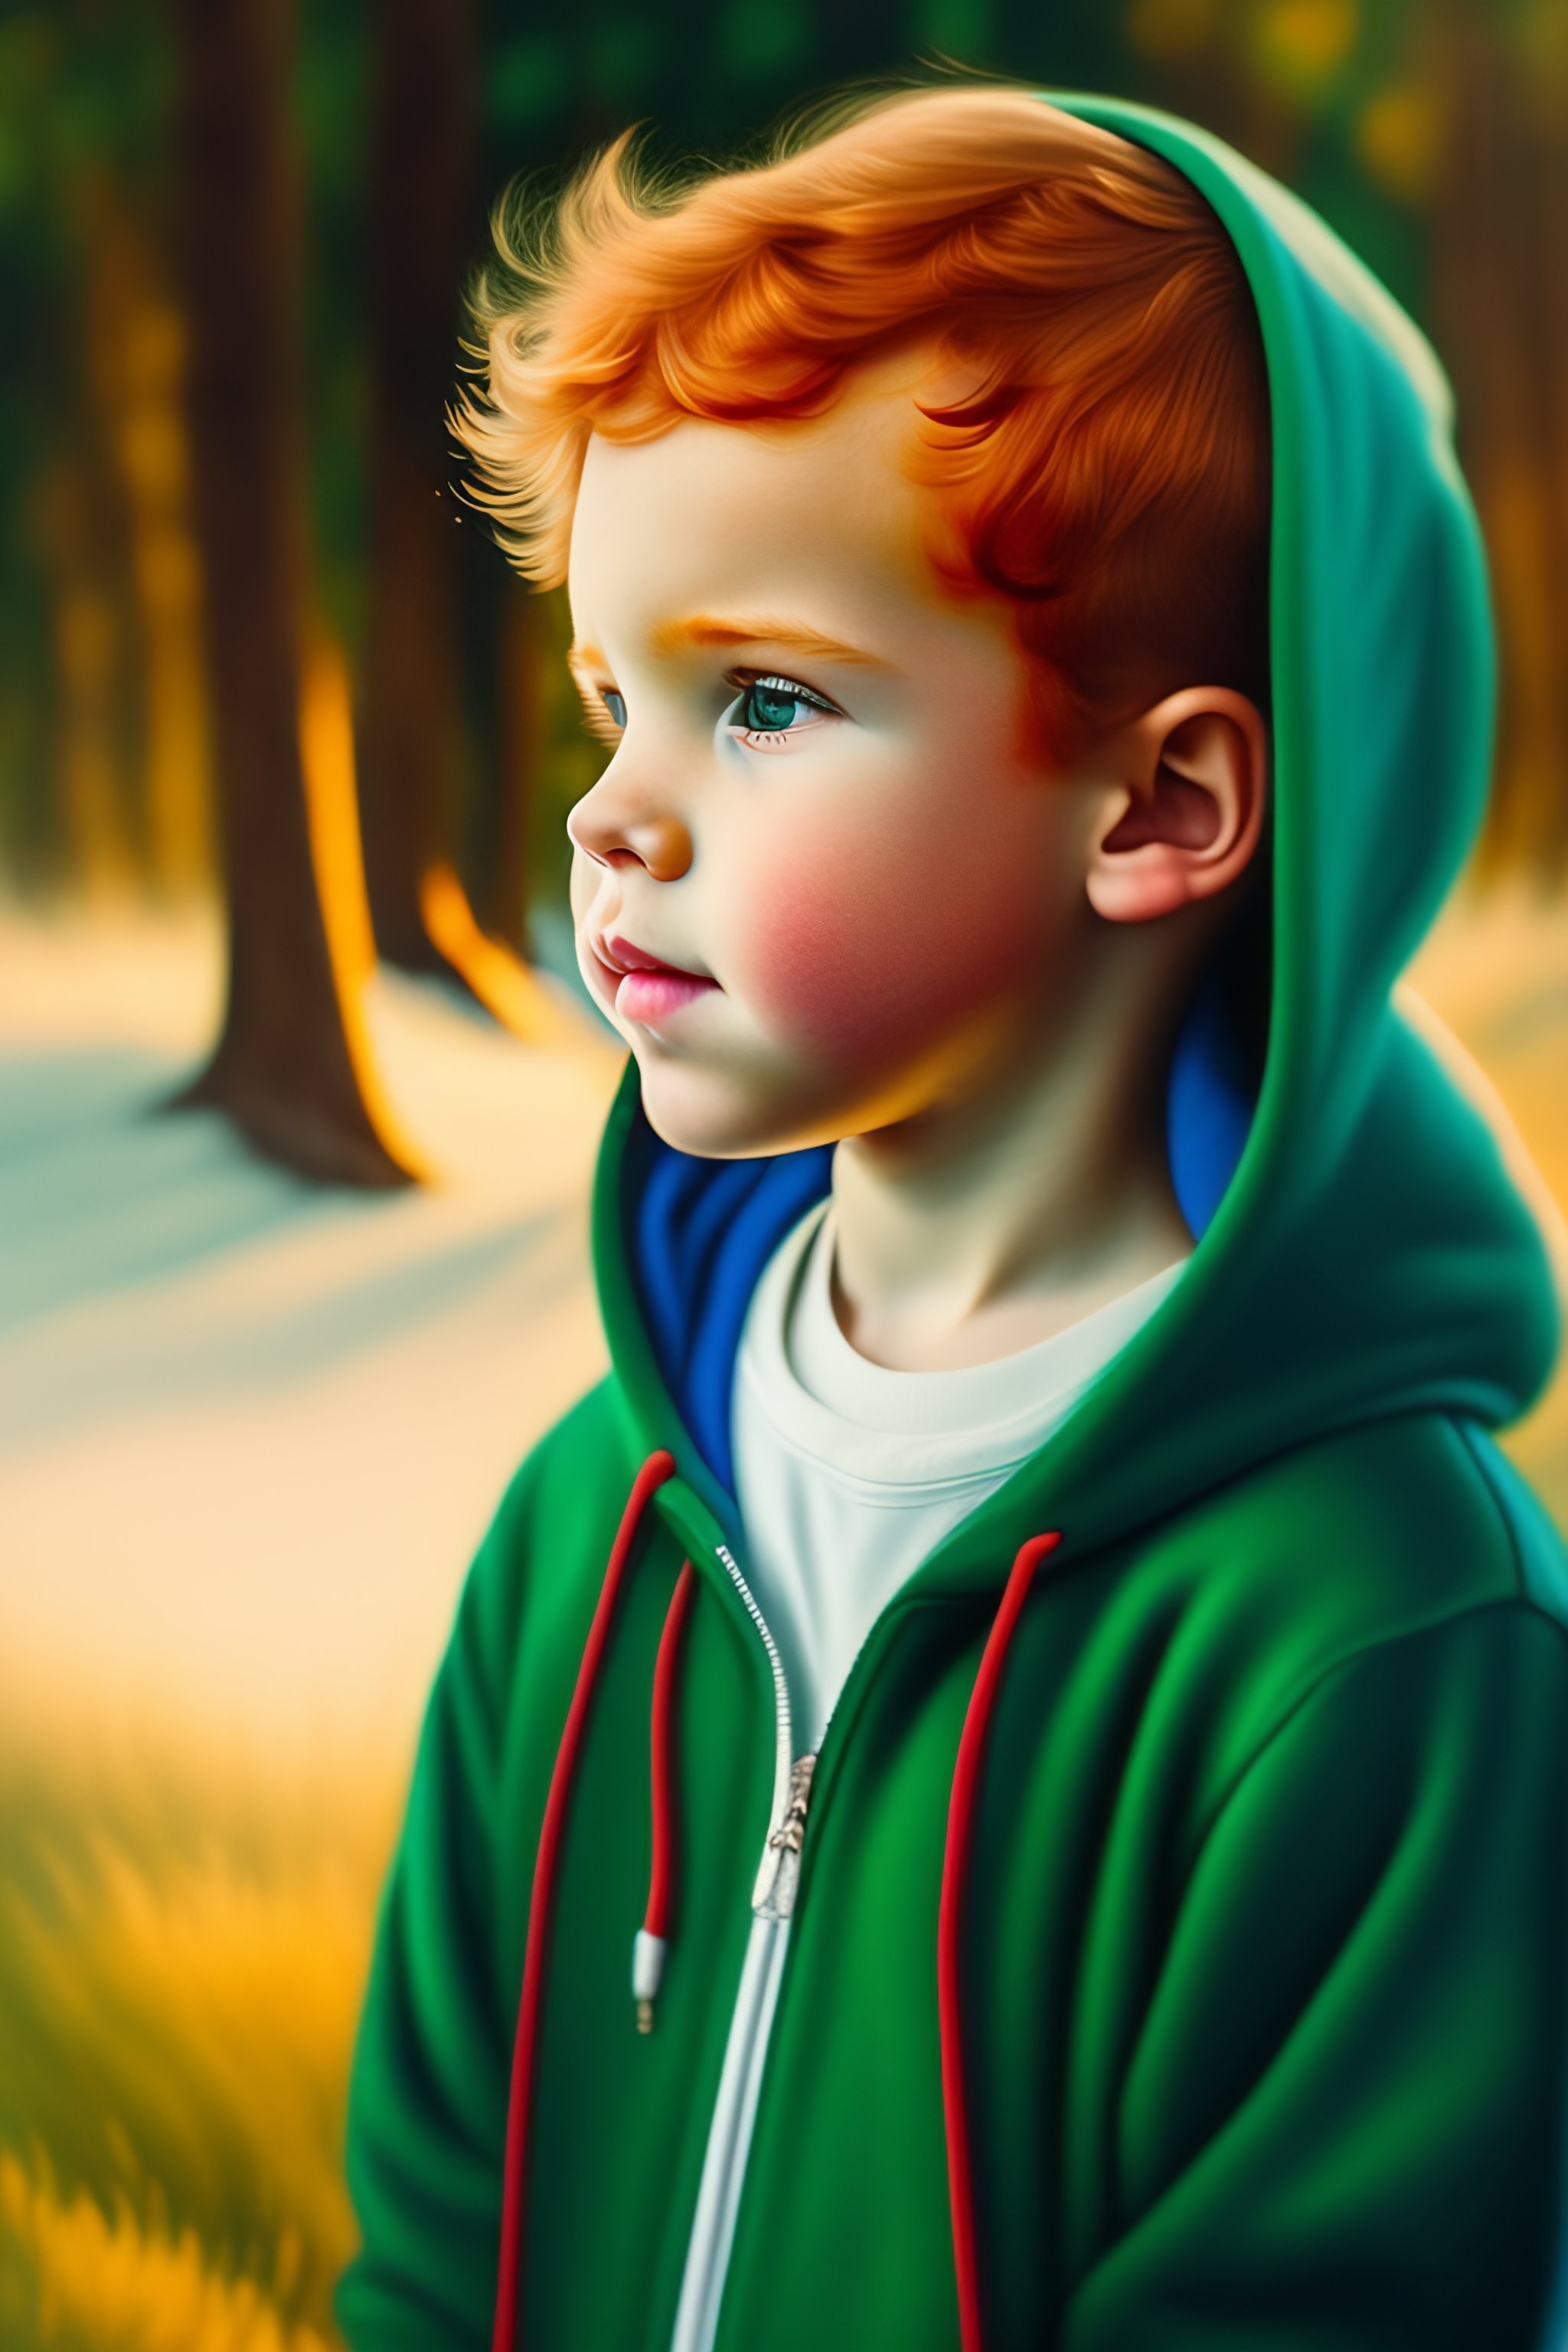 Lexica - A little boy with ginger hair wearing blue jeans and a green ...